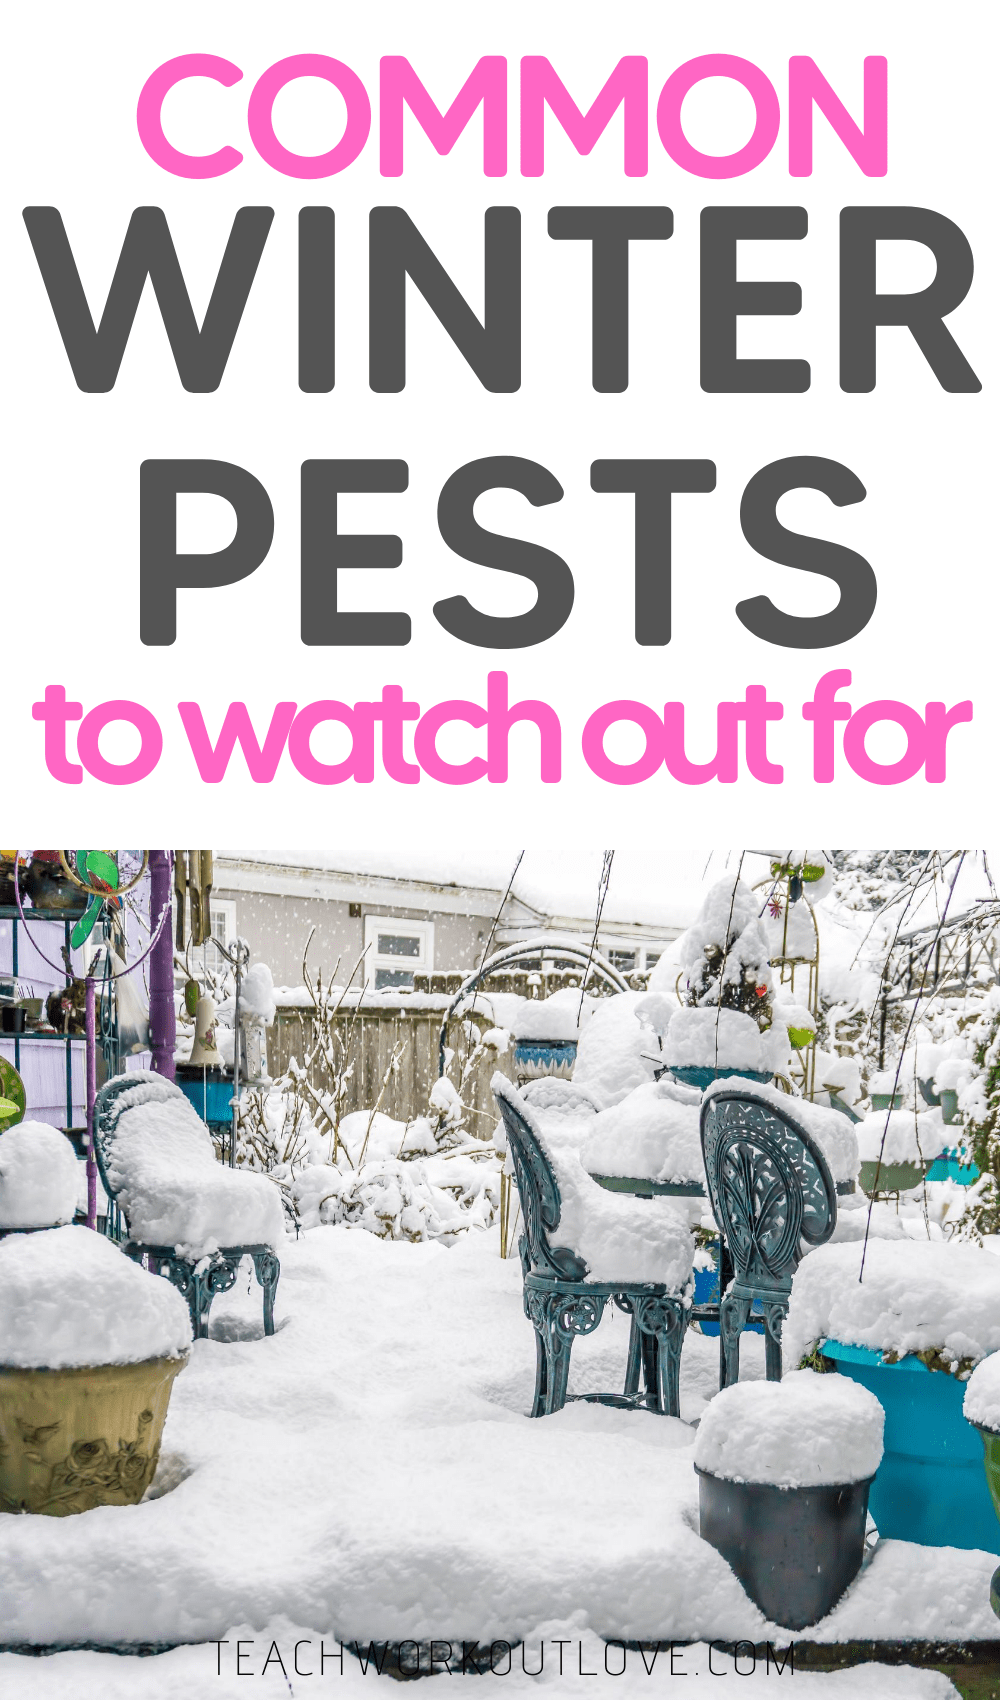 Summer season is almost over, and we are about to welcome the winter season! Here are some winter pests that you should watch out during winters: